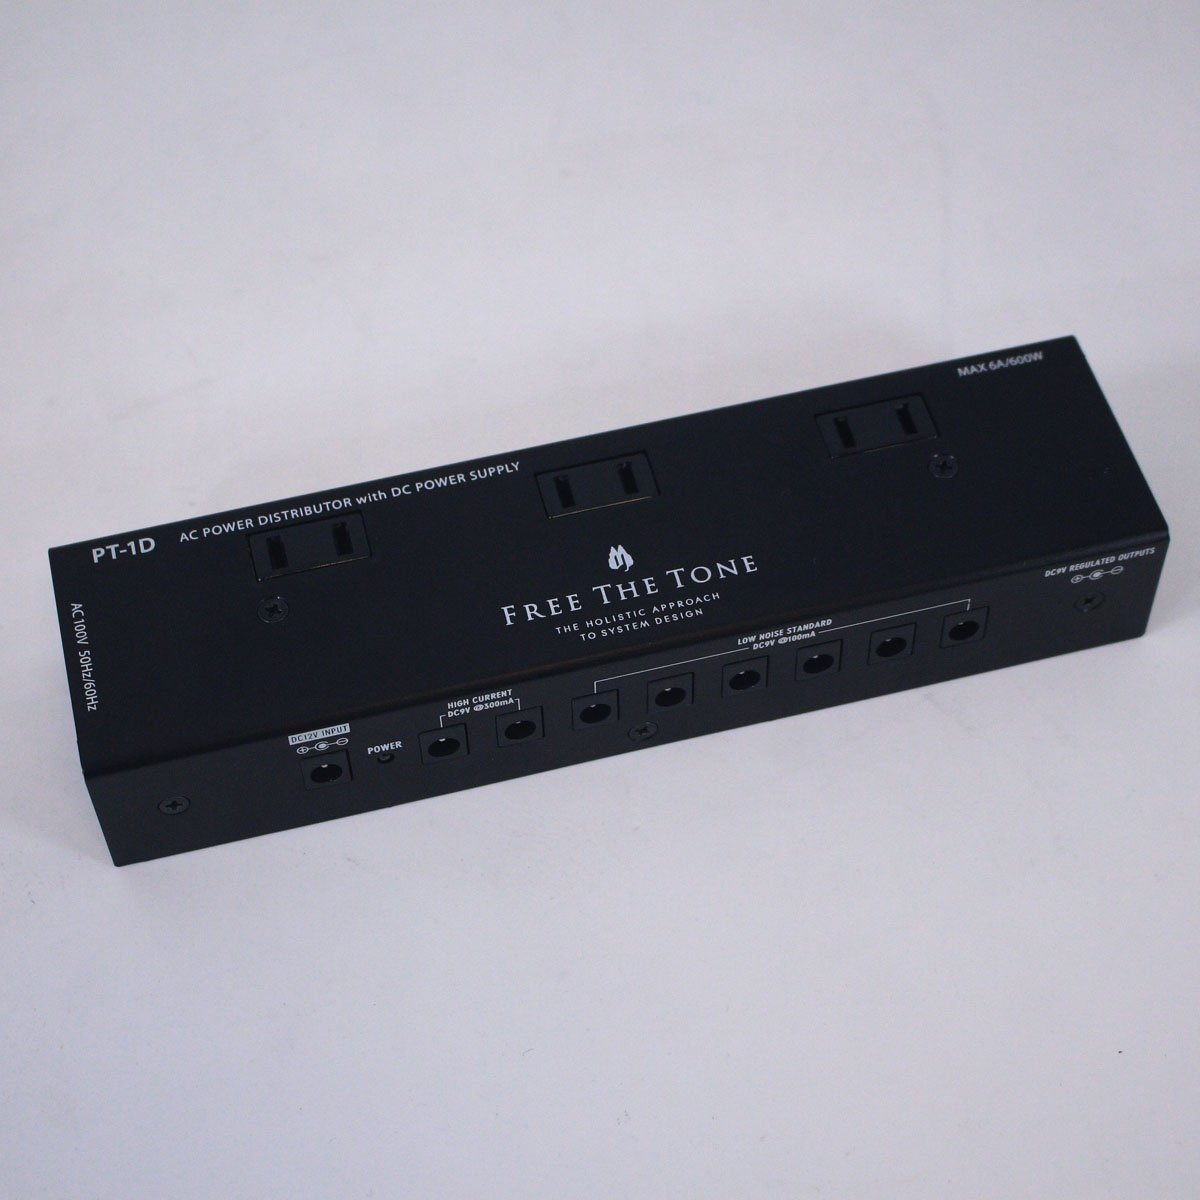 Free The Tone PT-1D / AC Power Distributor with DC Power Supply